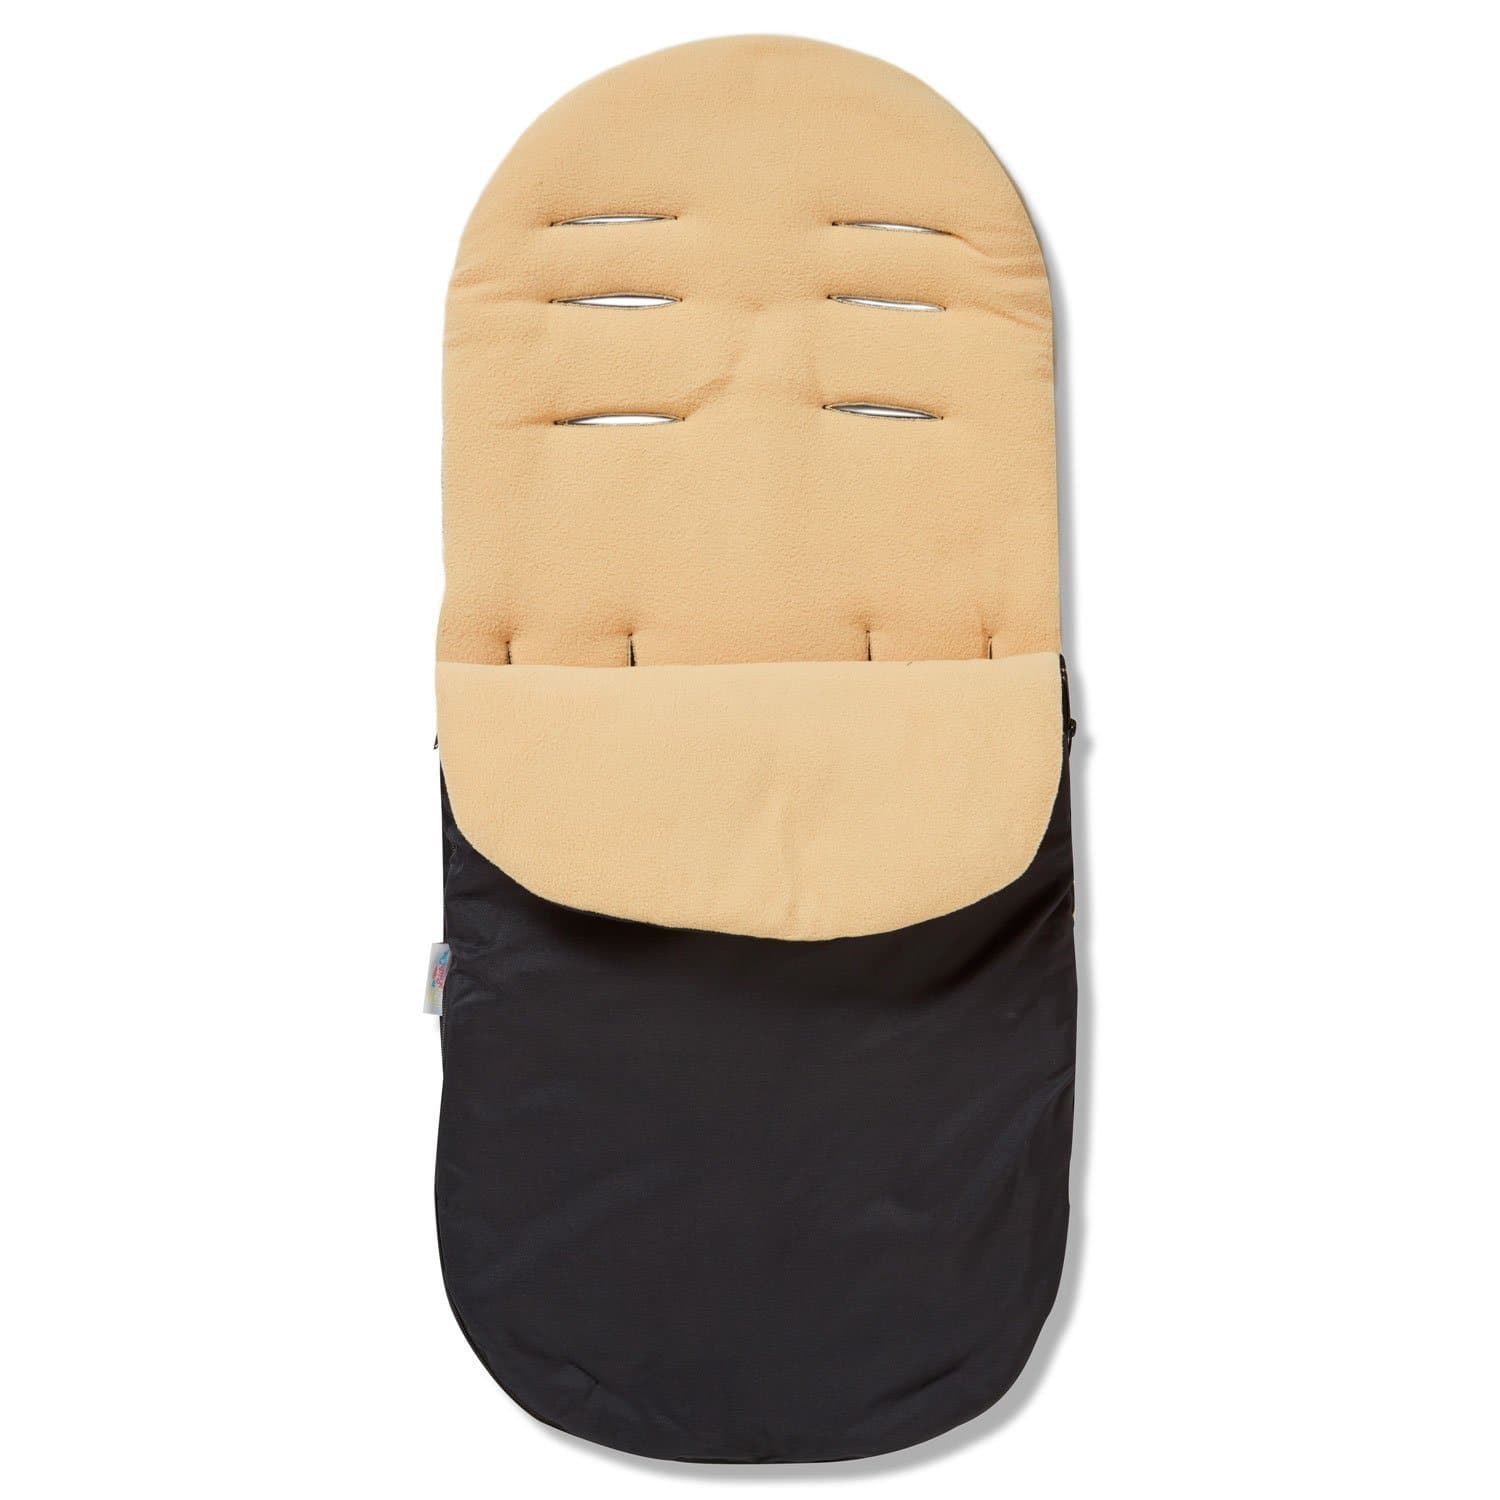 Footmuff / Cosy Toes Compatible with NeoNato - Sand / Fits All Models | For Your Little One